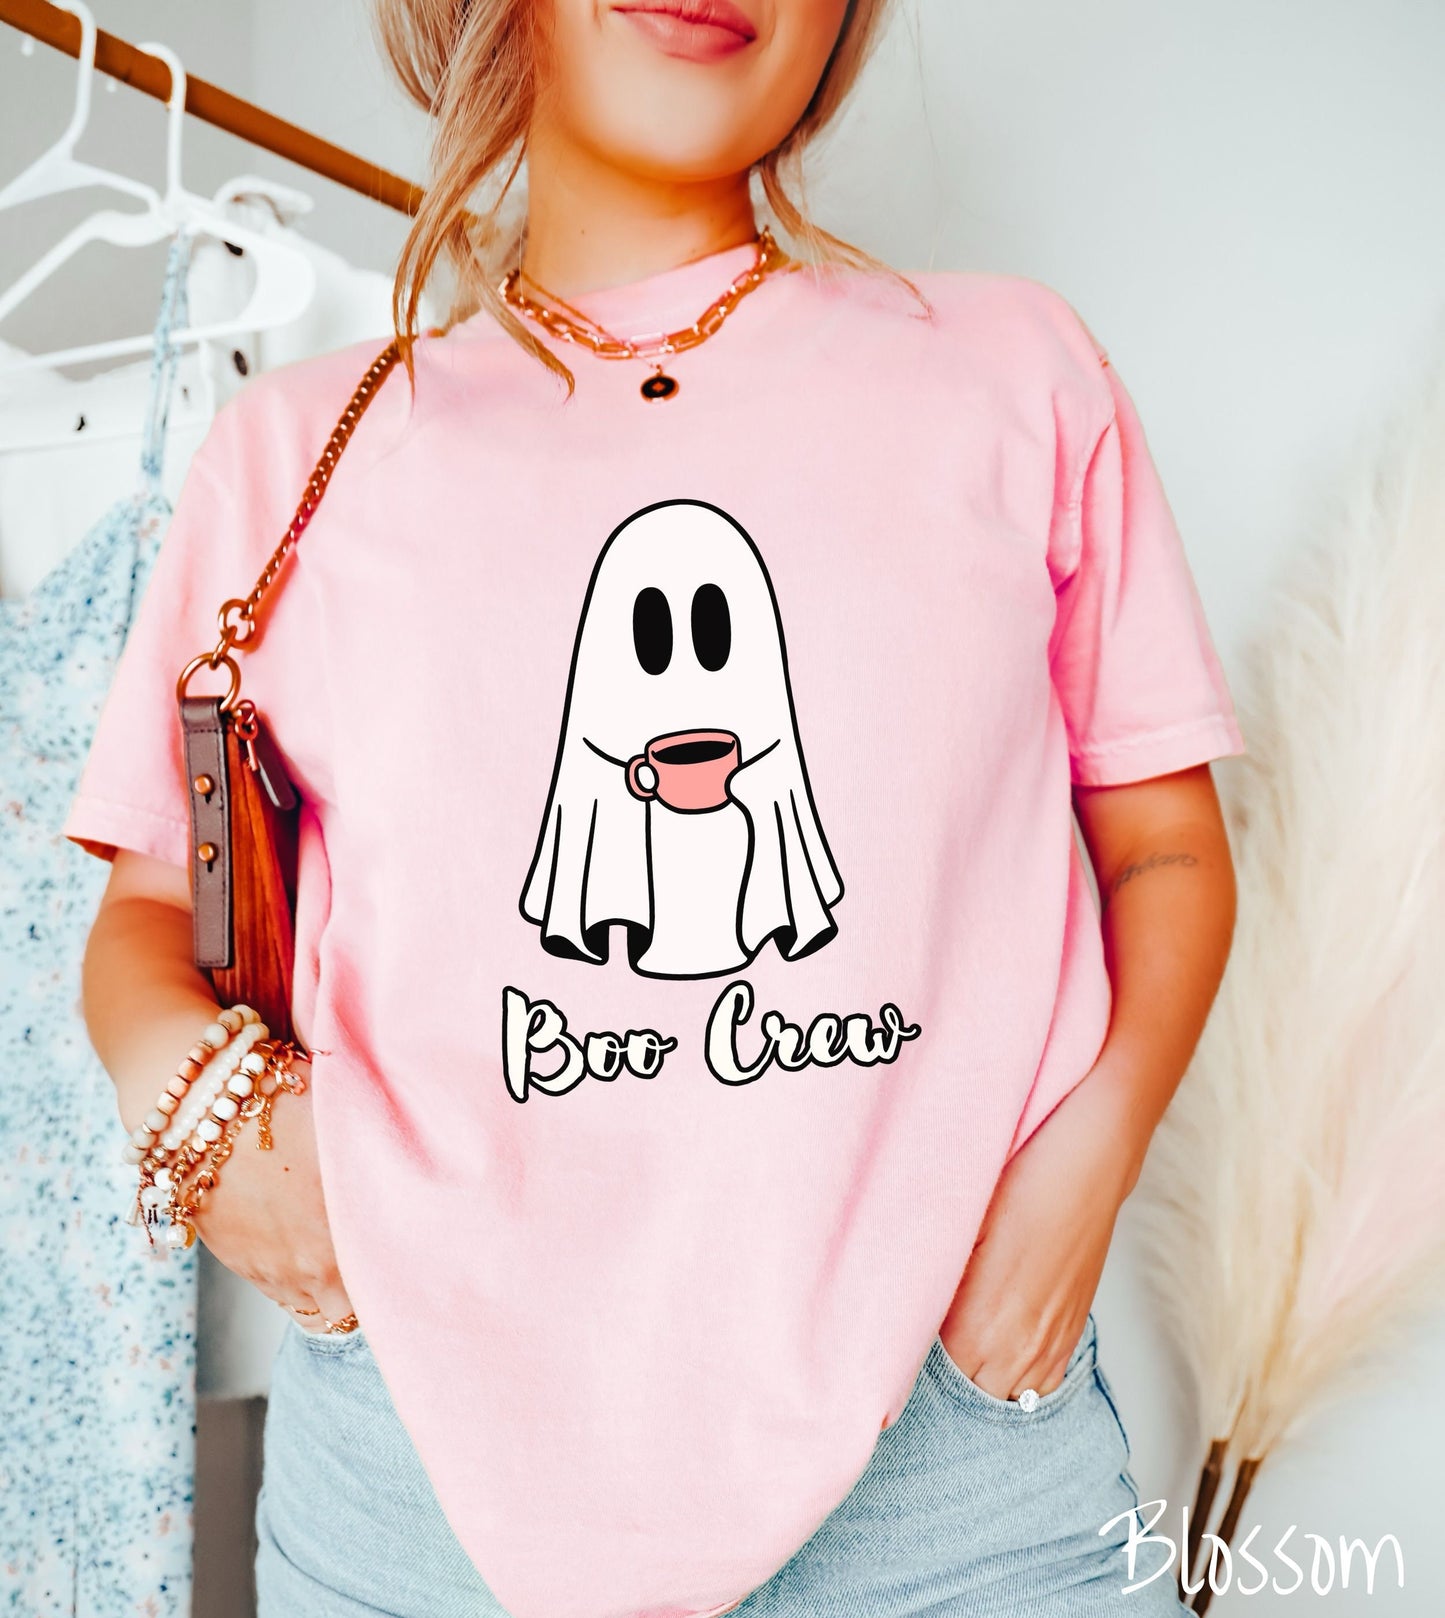 A woman wearing a cute blossom colored shirt with the text Boo Crew under a ghost figure holding a camera.